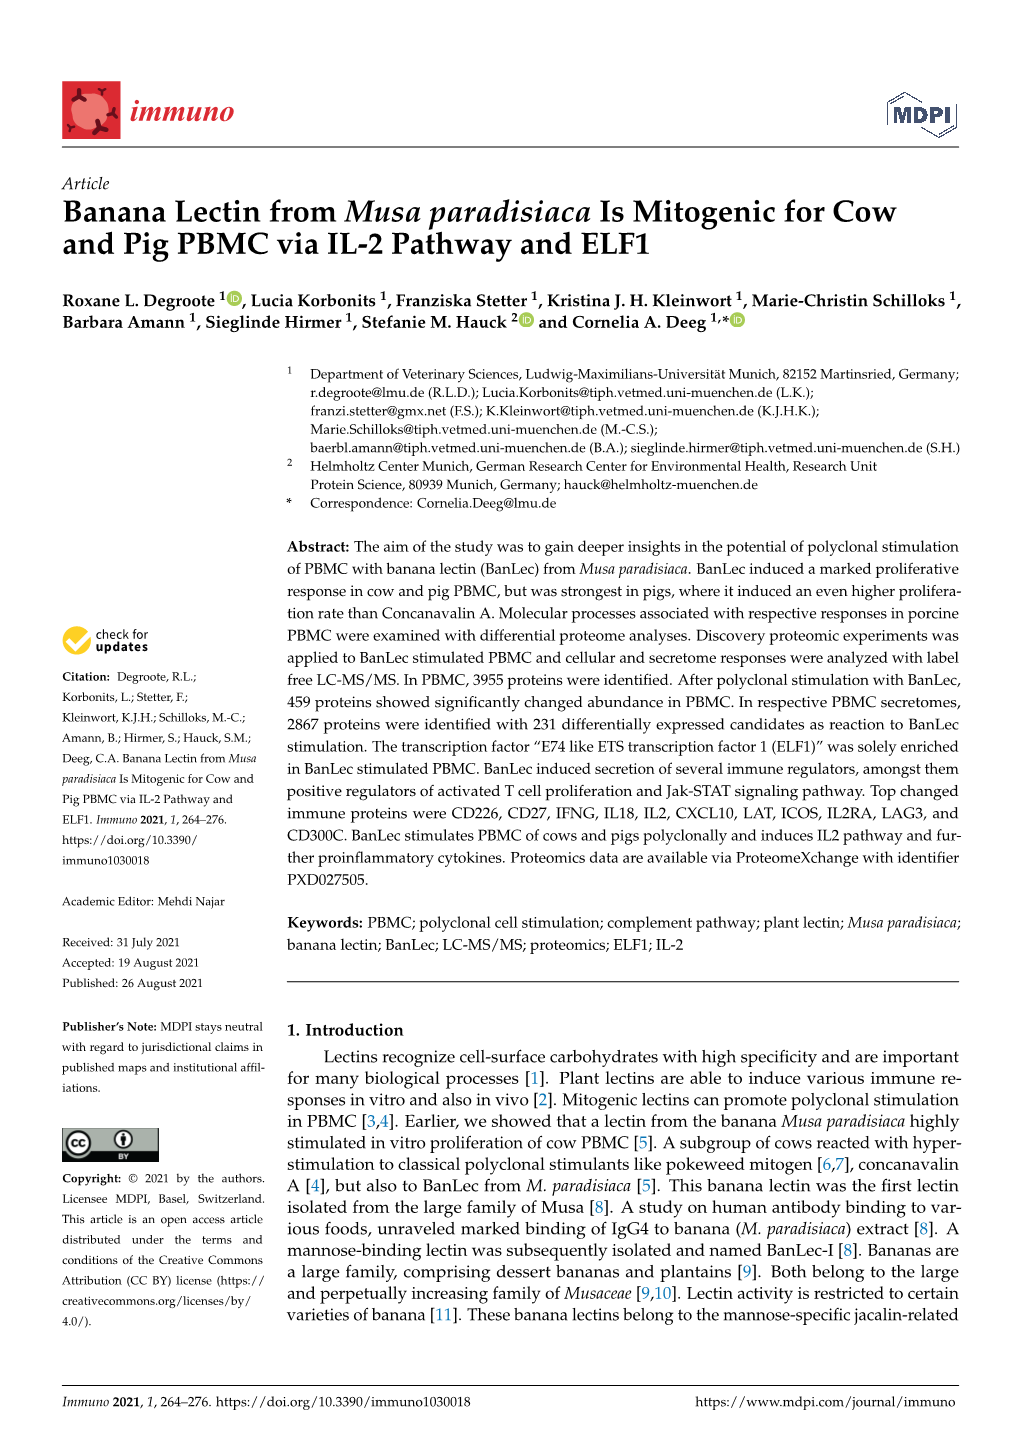 Banana Lectin from Musa Paradisiaca Is Mitogenic for Cow and Pig PBMC Via IL-2 Pathway and ELF1